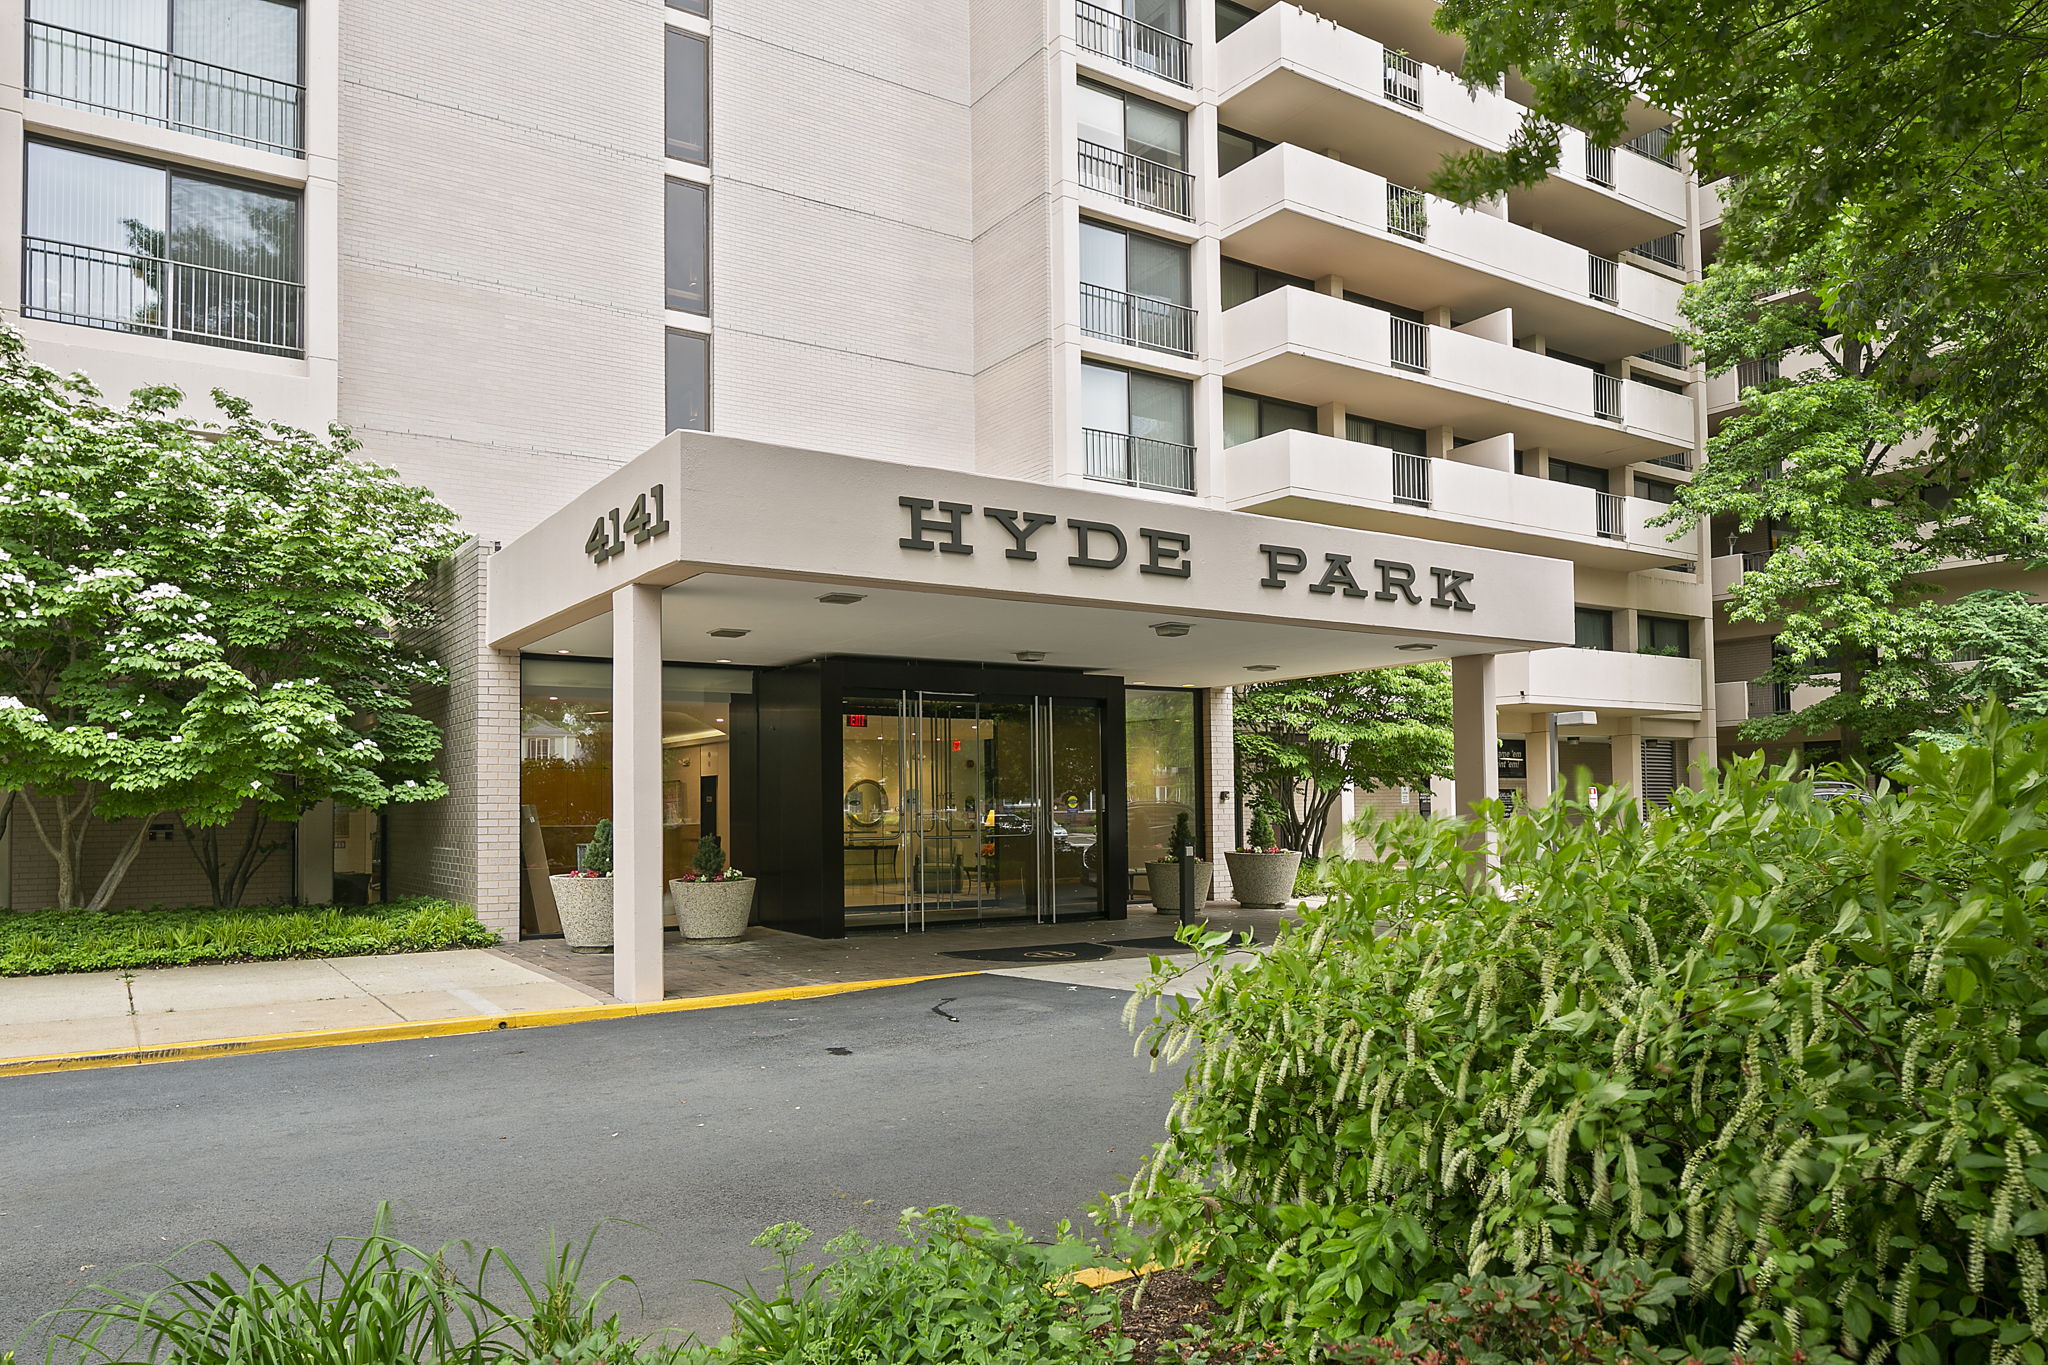 Welcome to Hyde Park in Ballston!